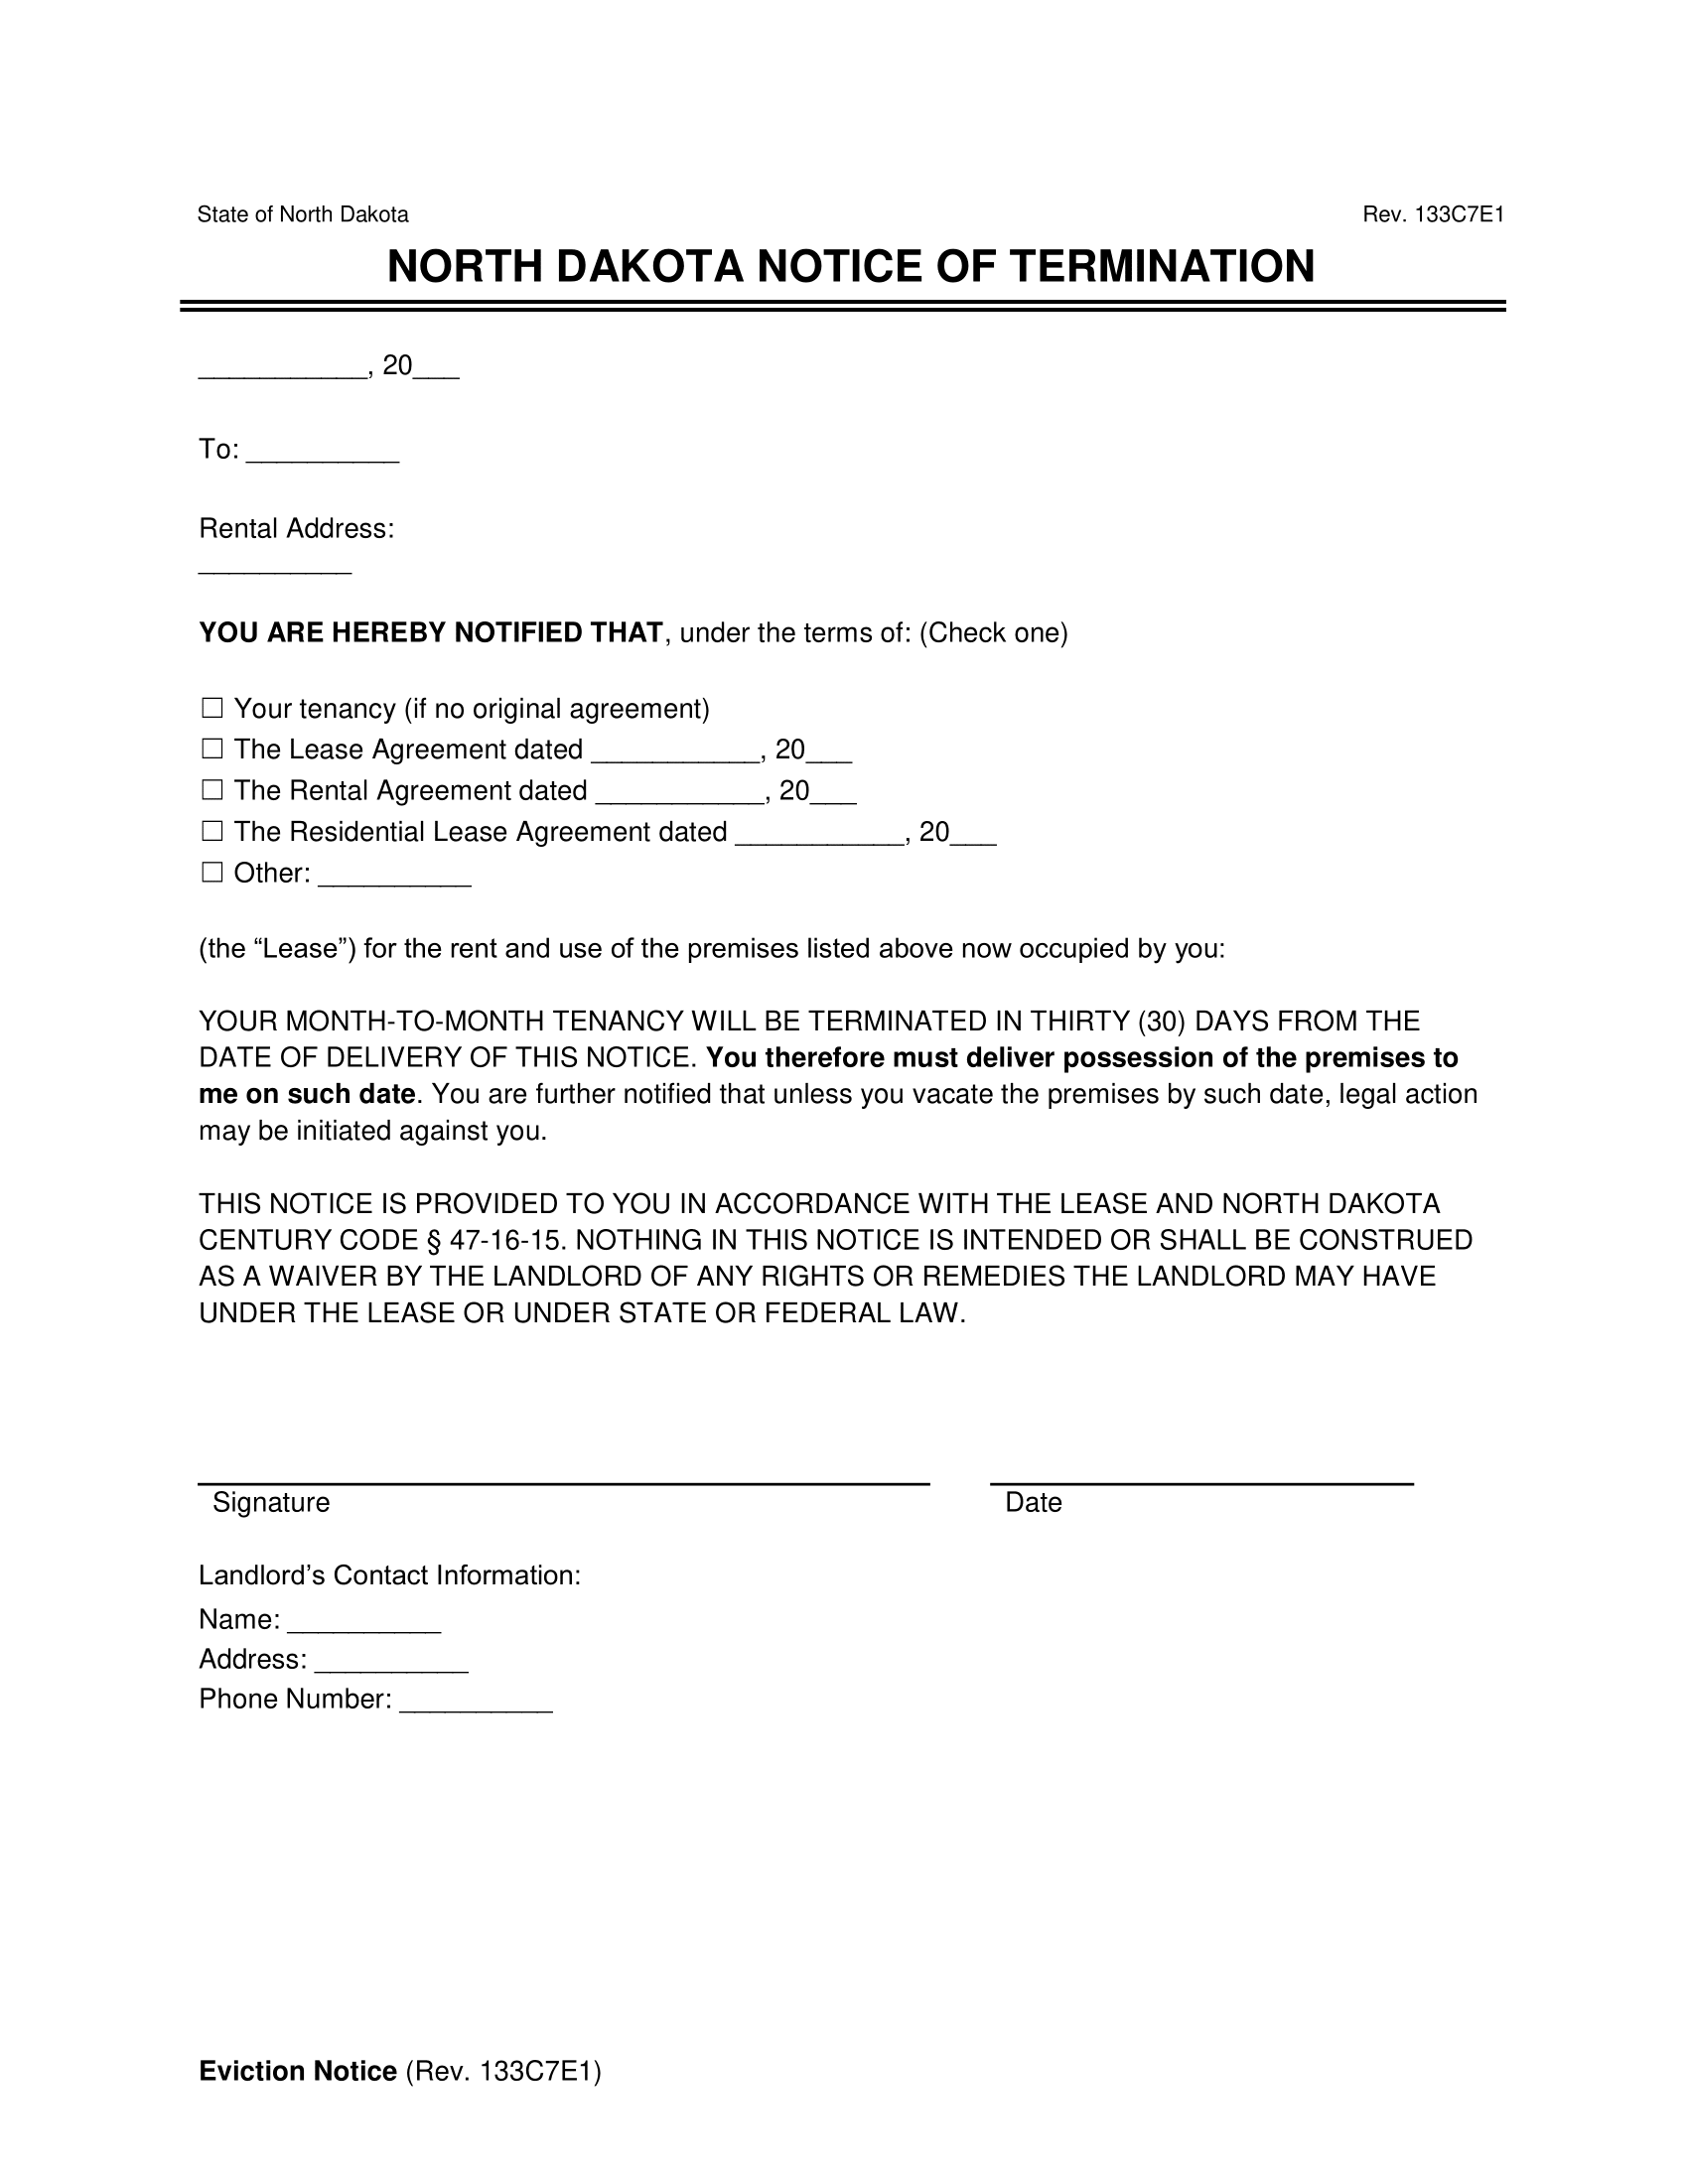 north dakota 30-day month-to-month lease termination